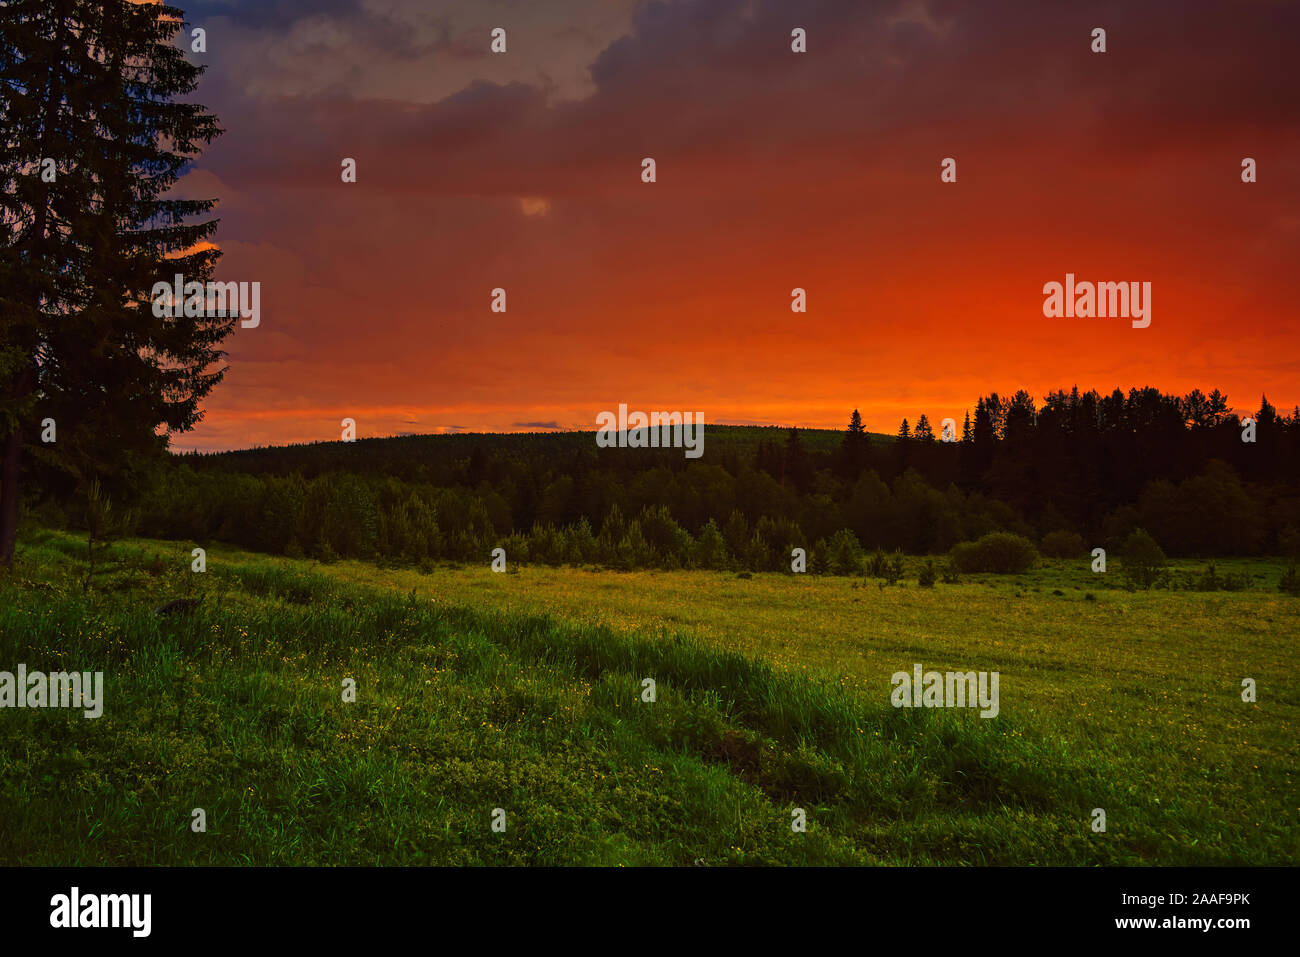 Sun setting behind spruce trees on a lush green slope. Sun setting behind spruce trees. Stock Photo